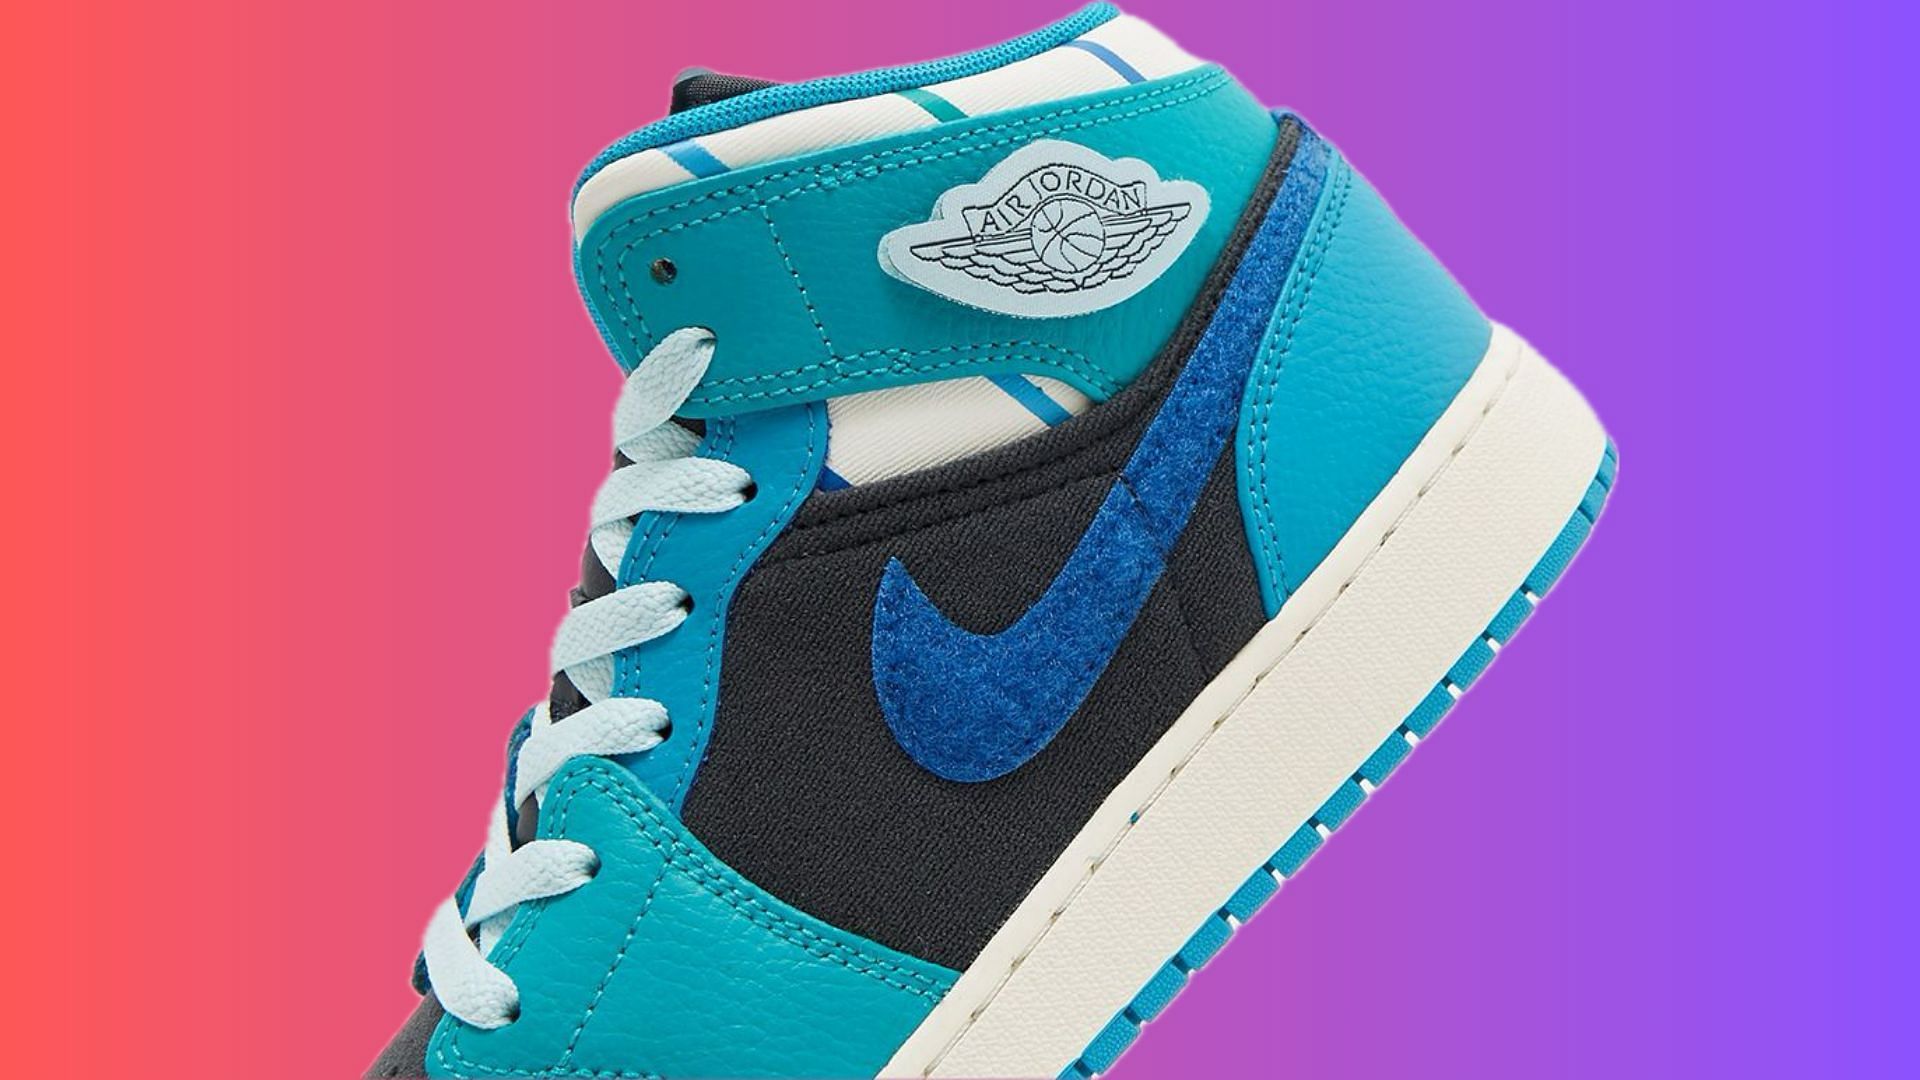 Air Jordan 1 Mid Inspired by the Greatest sneakers (Image via JD Sports UK)